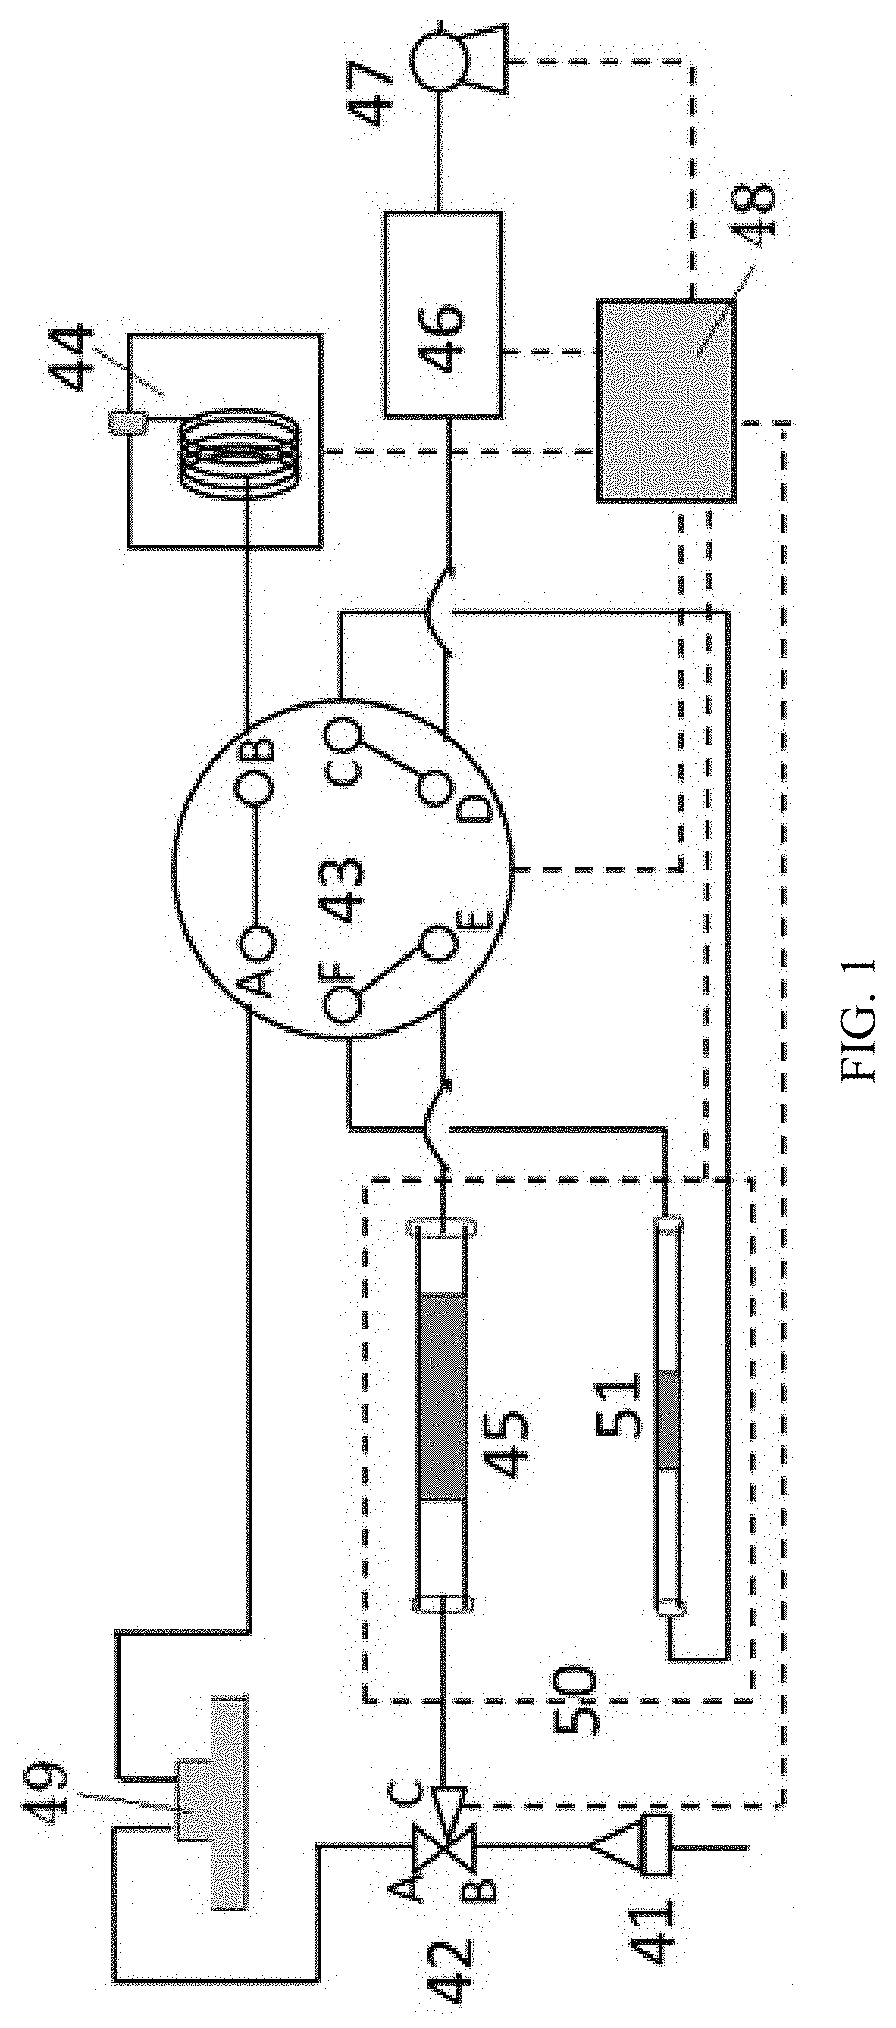 Online measuring system, method and application for semi-volatile organic compound in gas phase